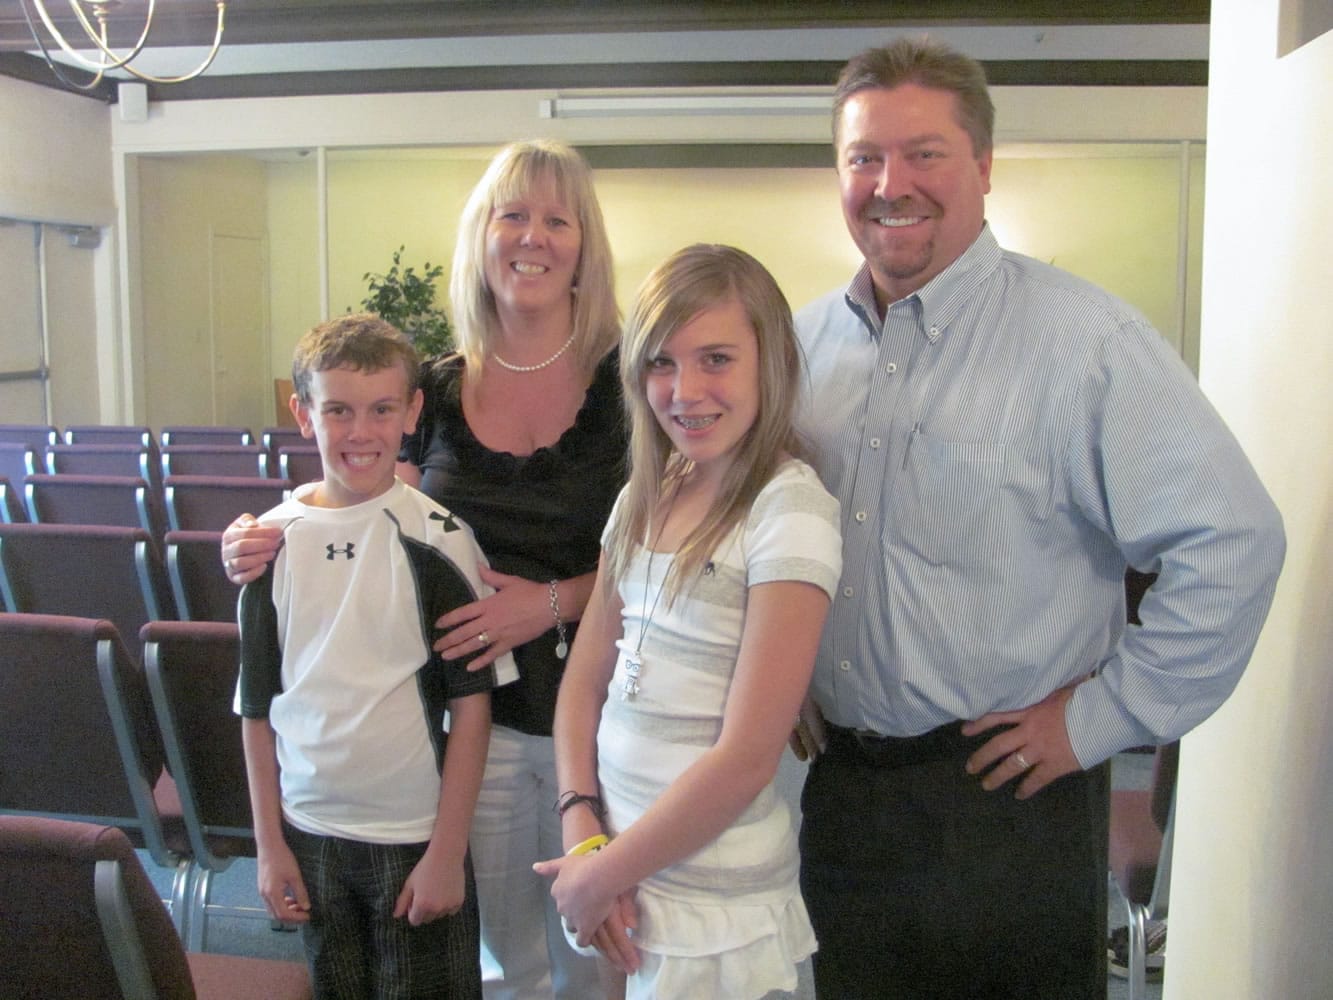 Wendi and Chris Dierickx and their children Dalton and Ashton, stand in the chapel at Straub's Funeral Home. The business is celebrating its 100th anniversary in downtown Camas. &quot;It is quite a milestone,&quot; Chris said.